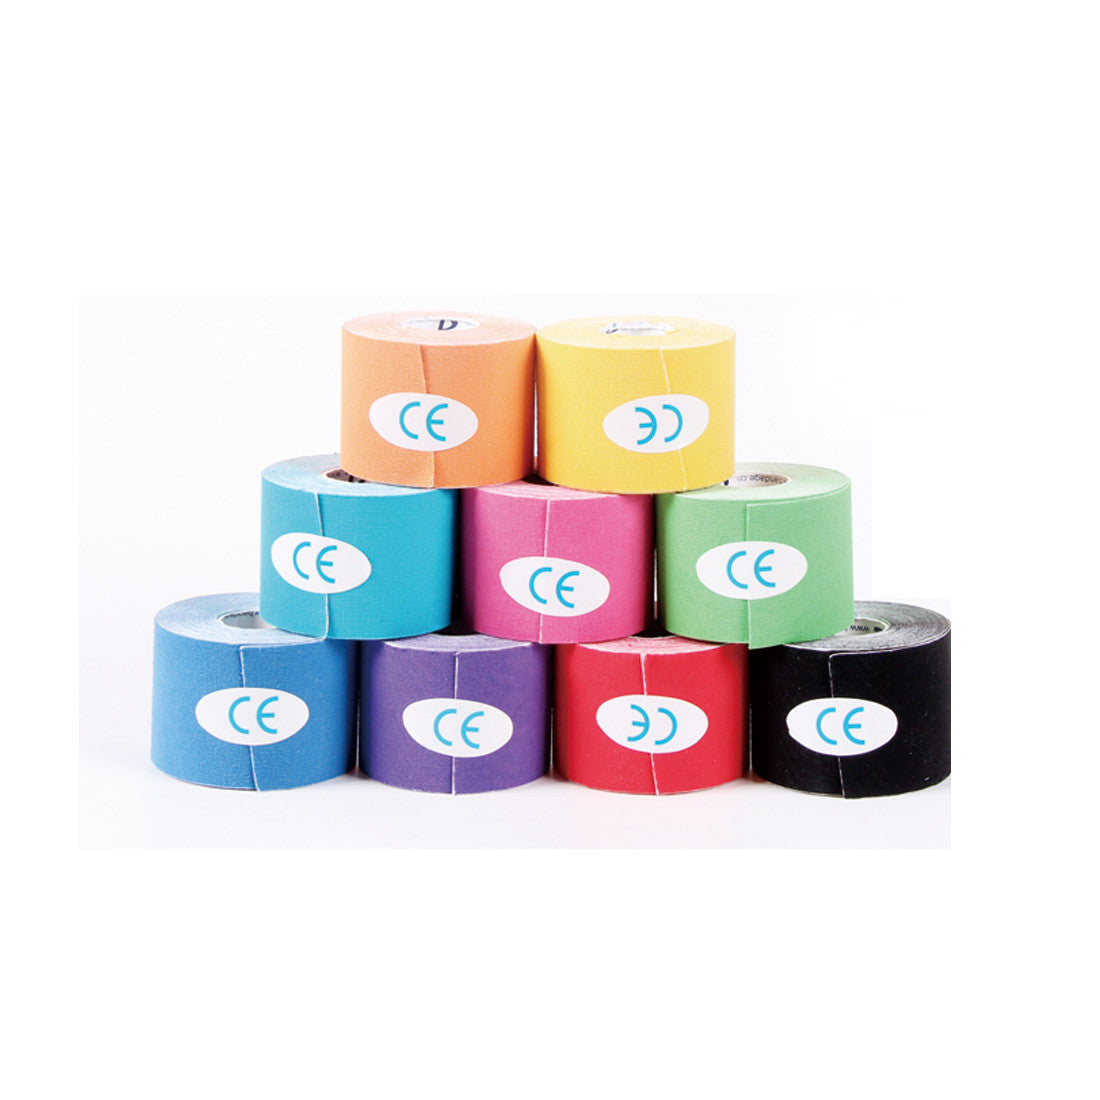 Kinesiology tape 5cm x 5m - DL030203 [FOB Price] - color